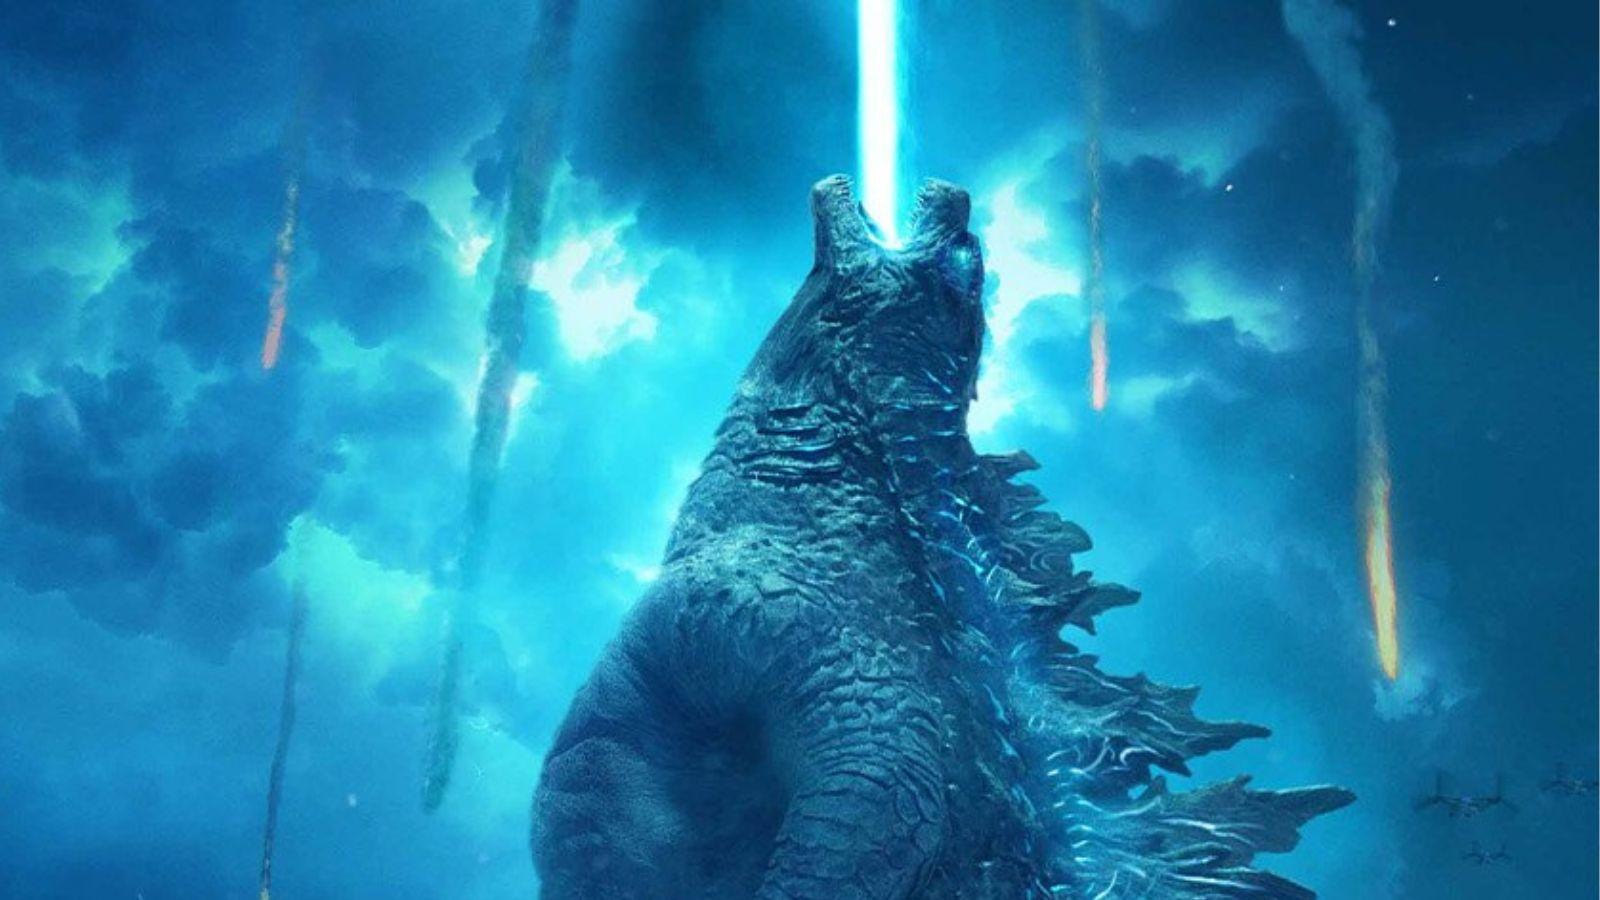 Godzilla in King of the Monsters.